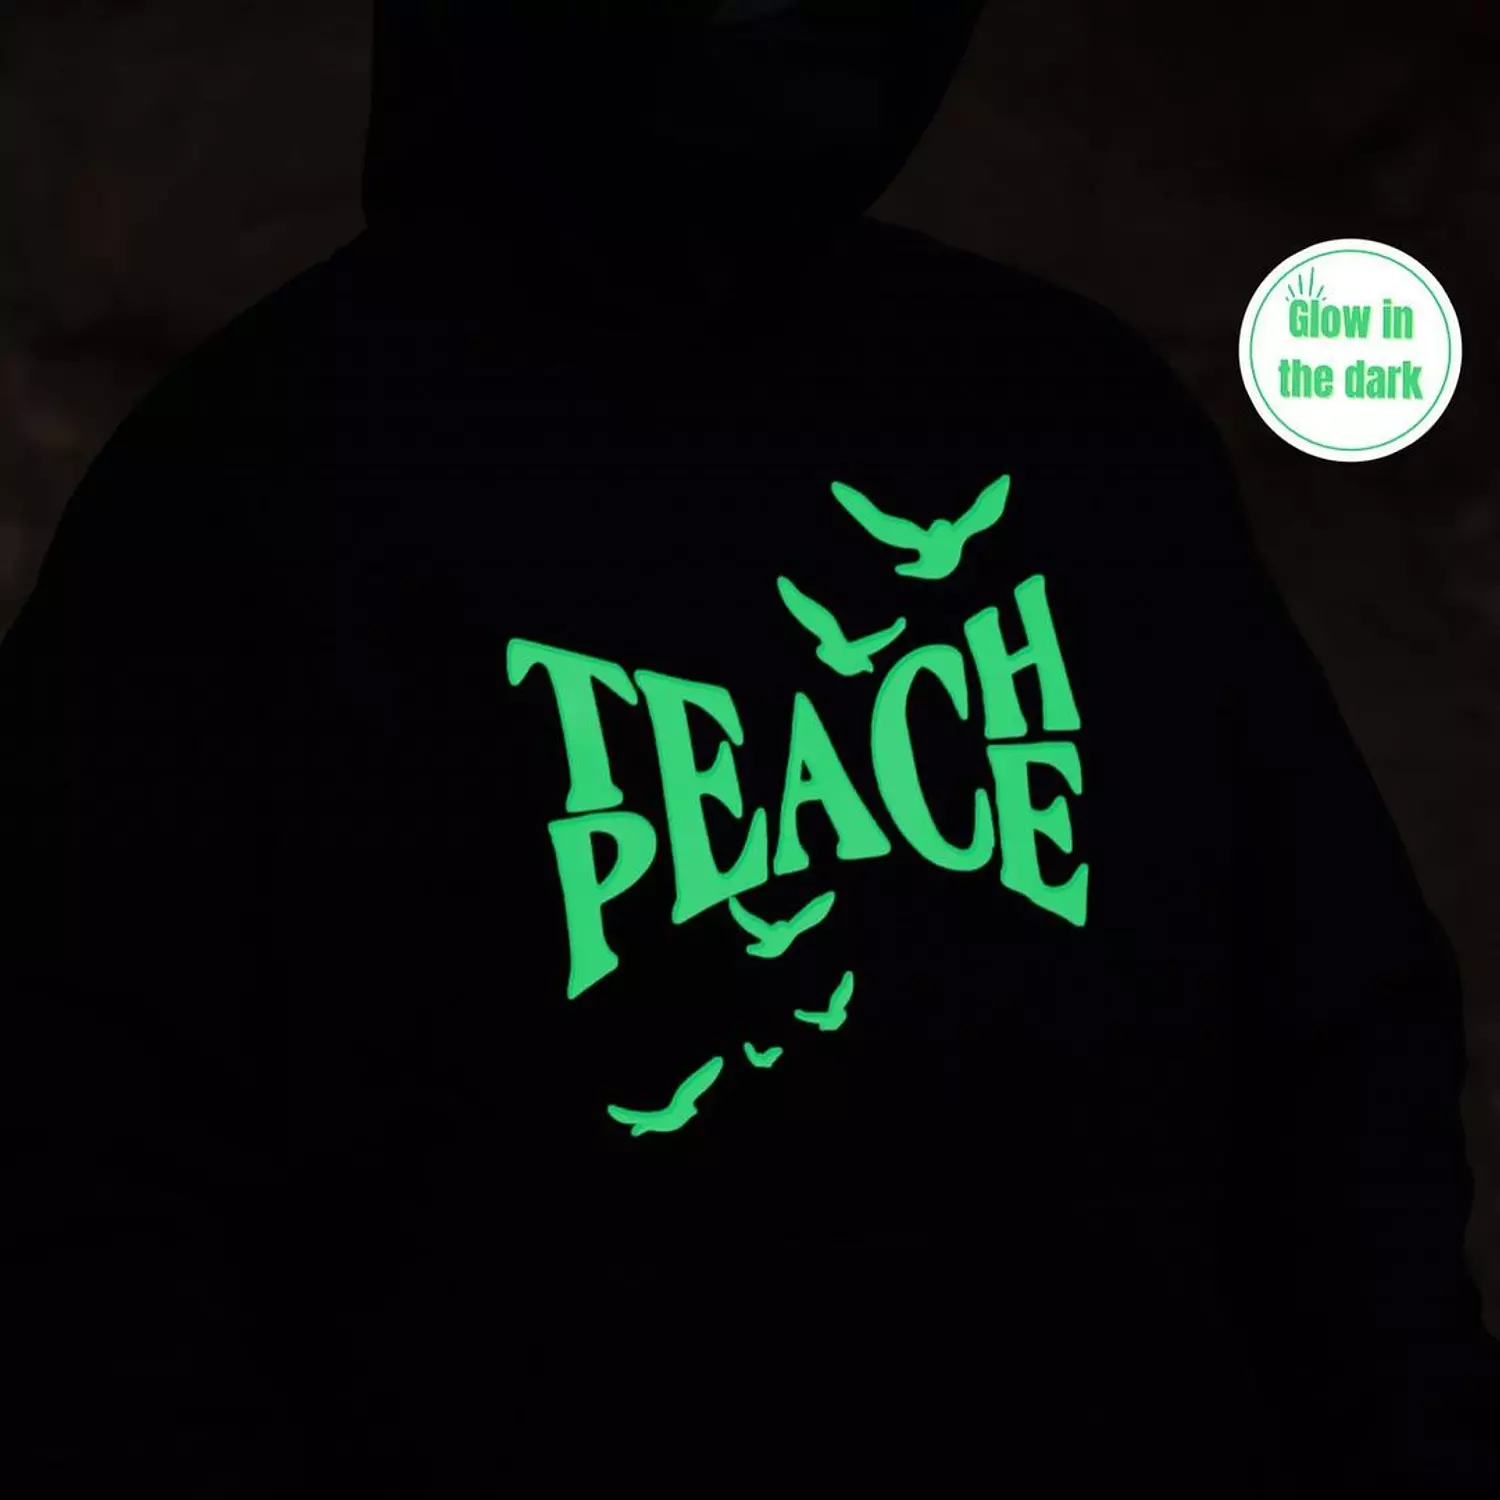 Teach Peace Glow In The Dark hover image